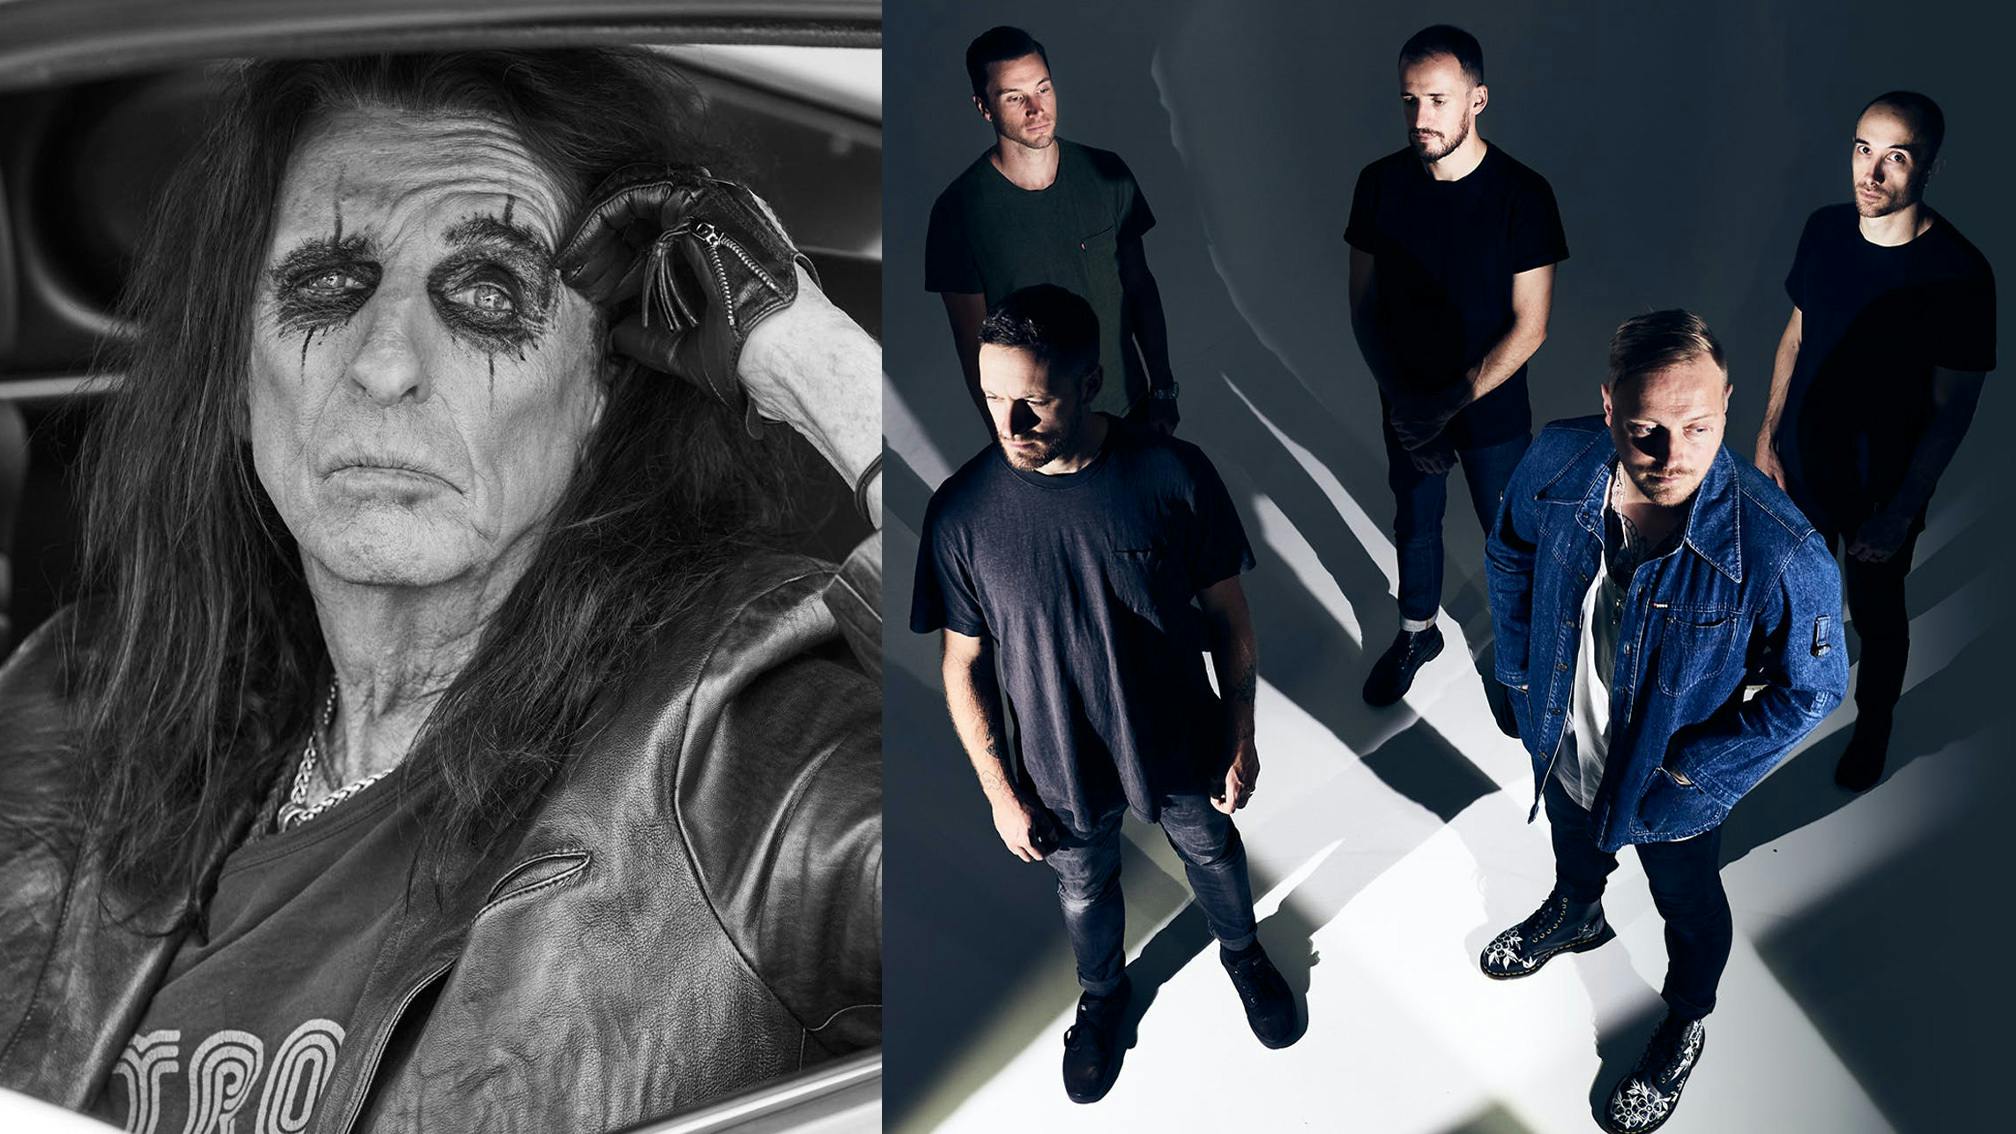 Alice Cooper and Architects are 2nd and 3rd in the UK midweek charts